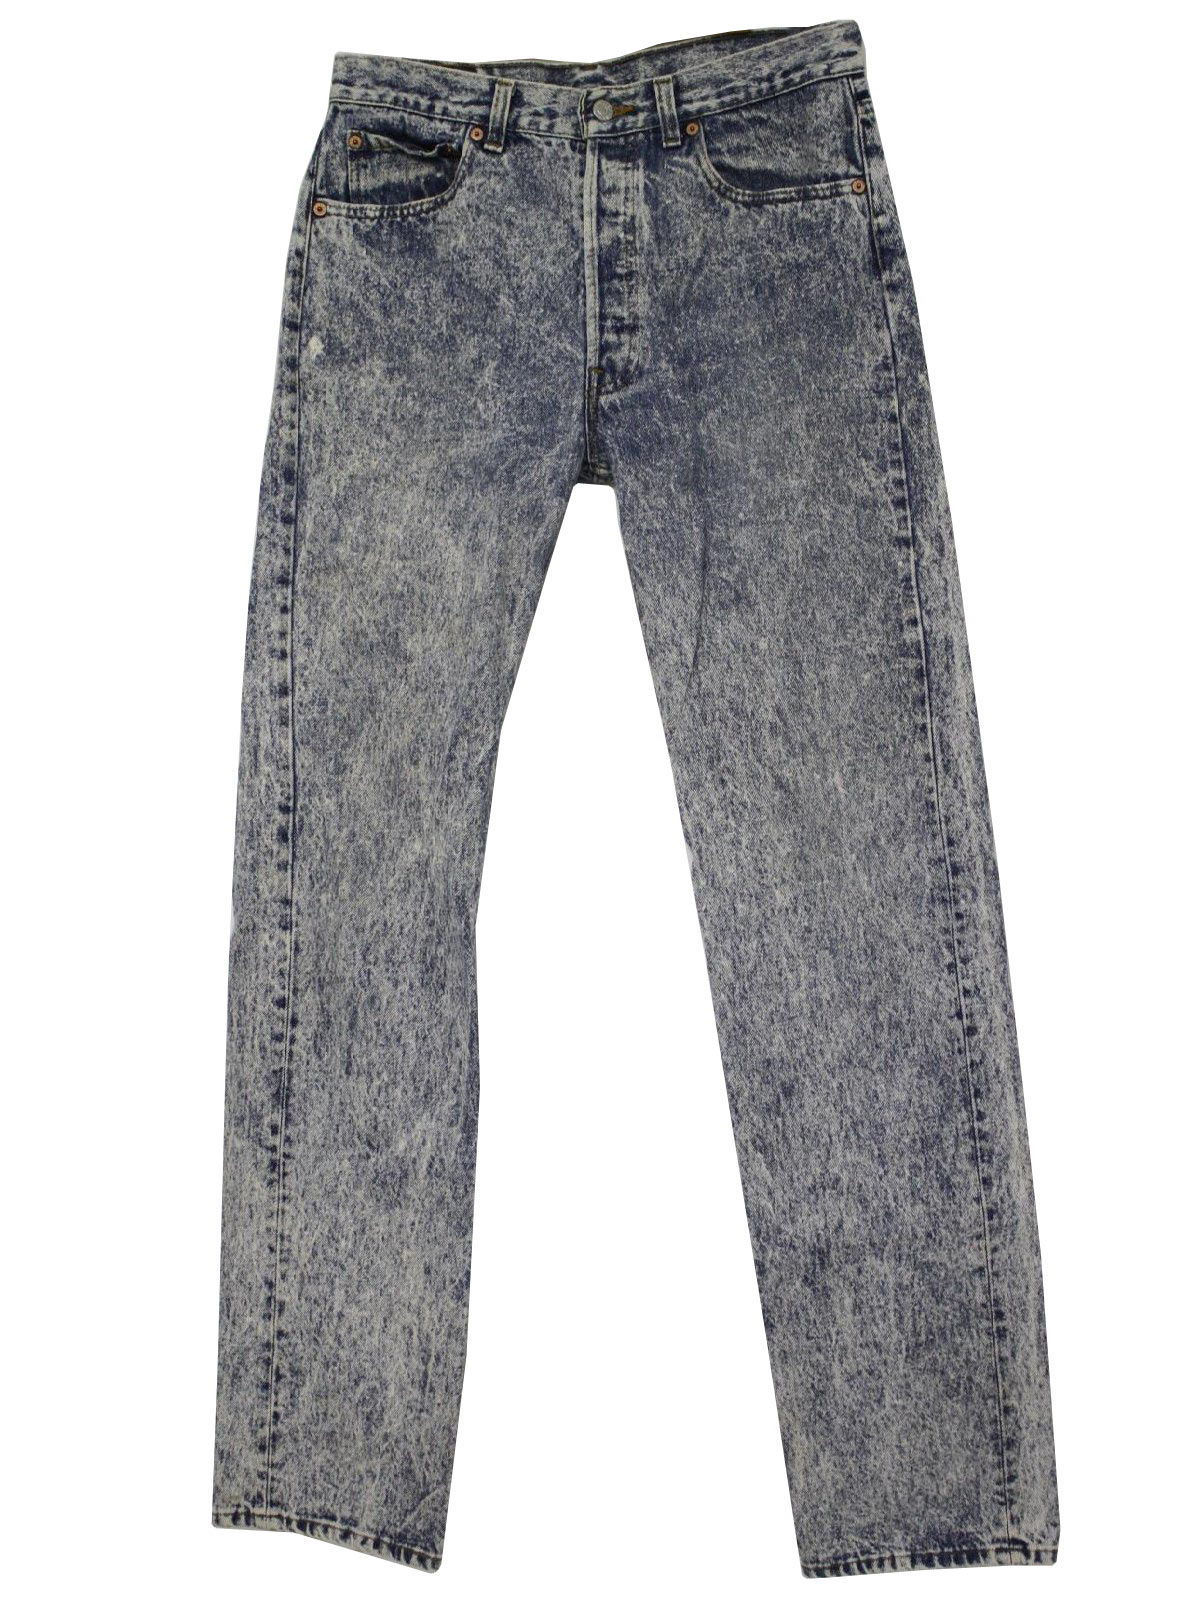 Levis Eighties Vintage Pants: 80s -Levis- Mens blue and white with gold ...